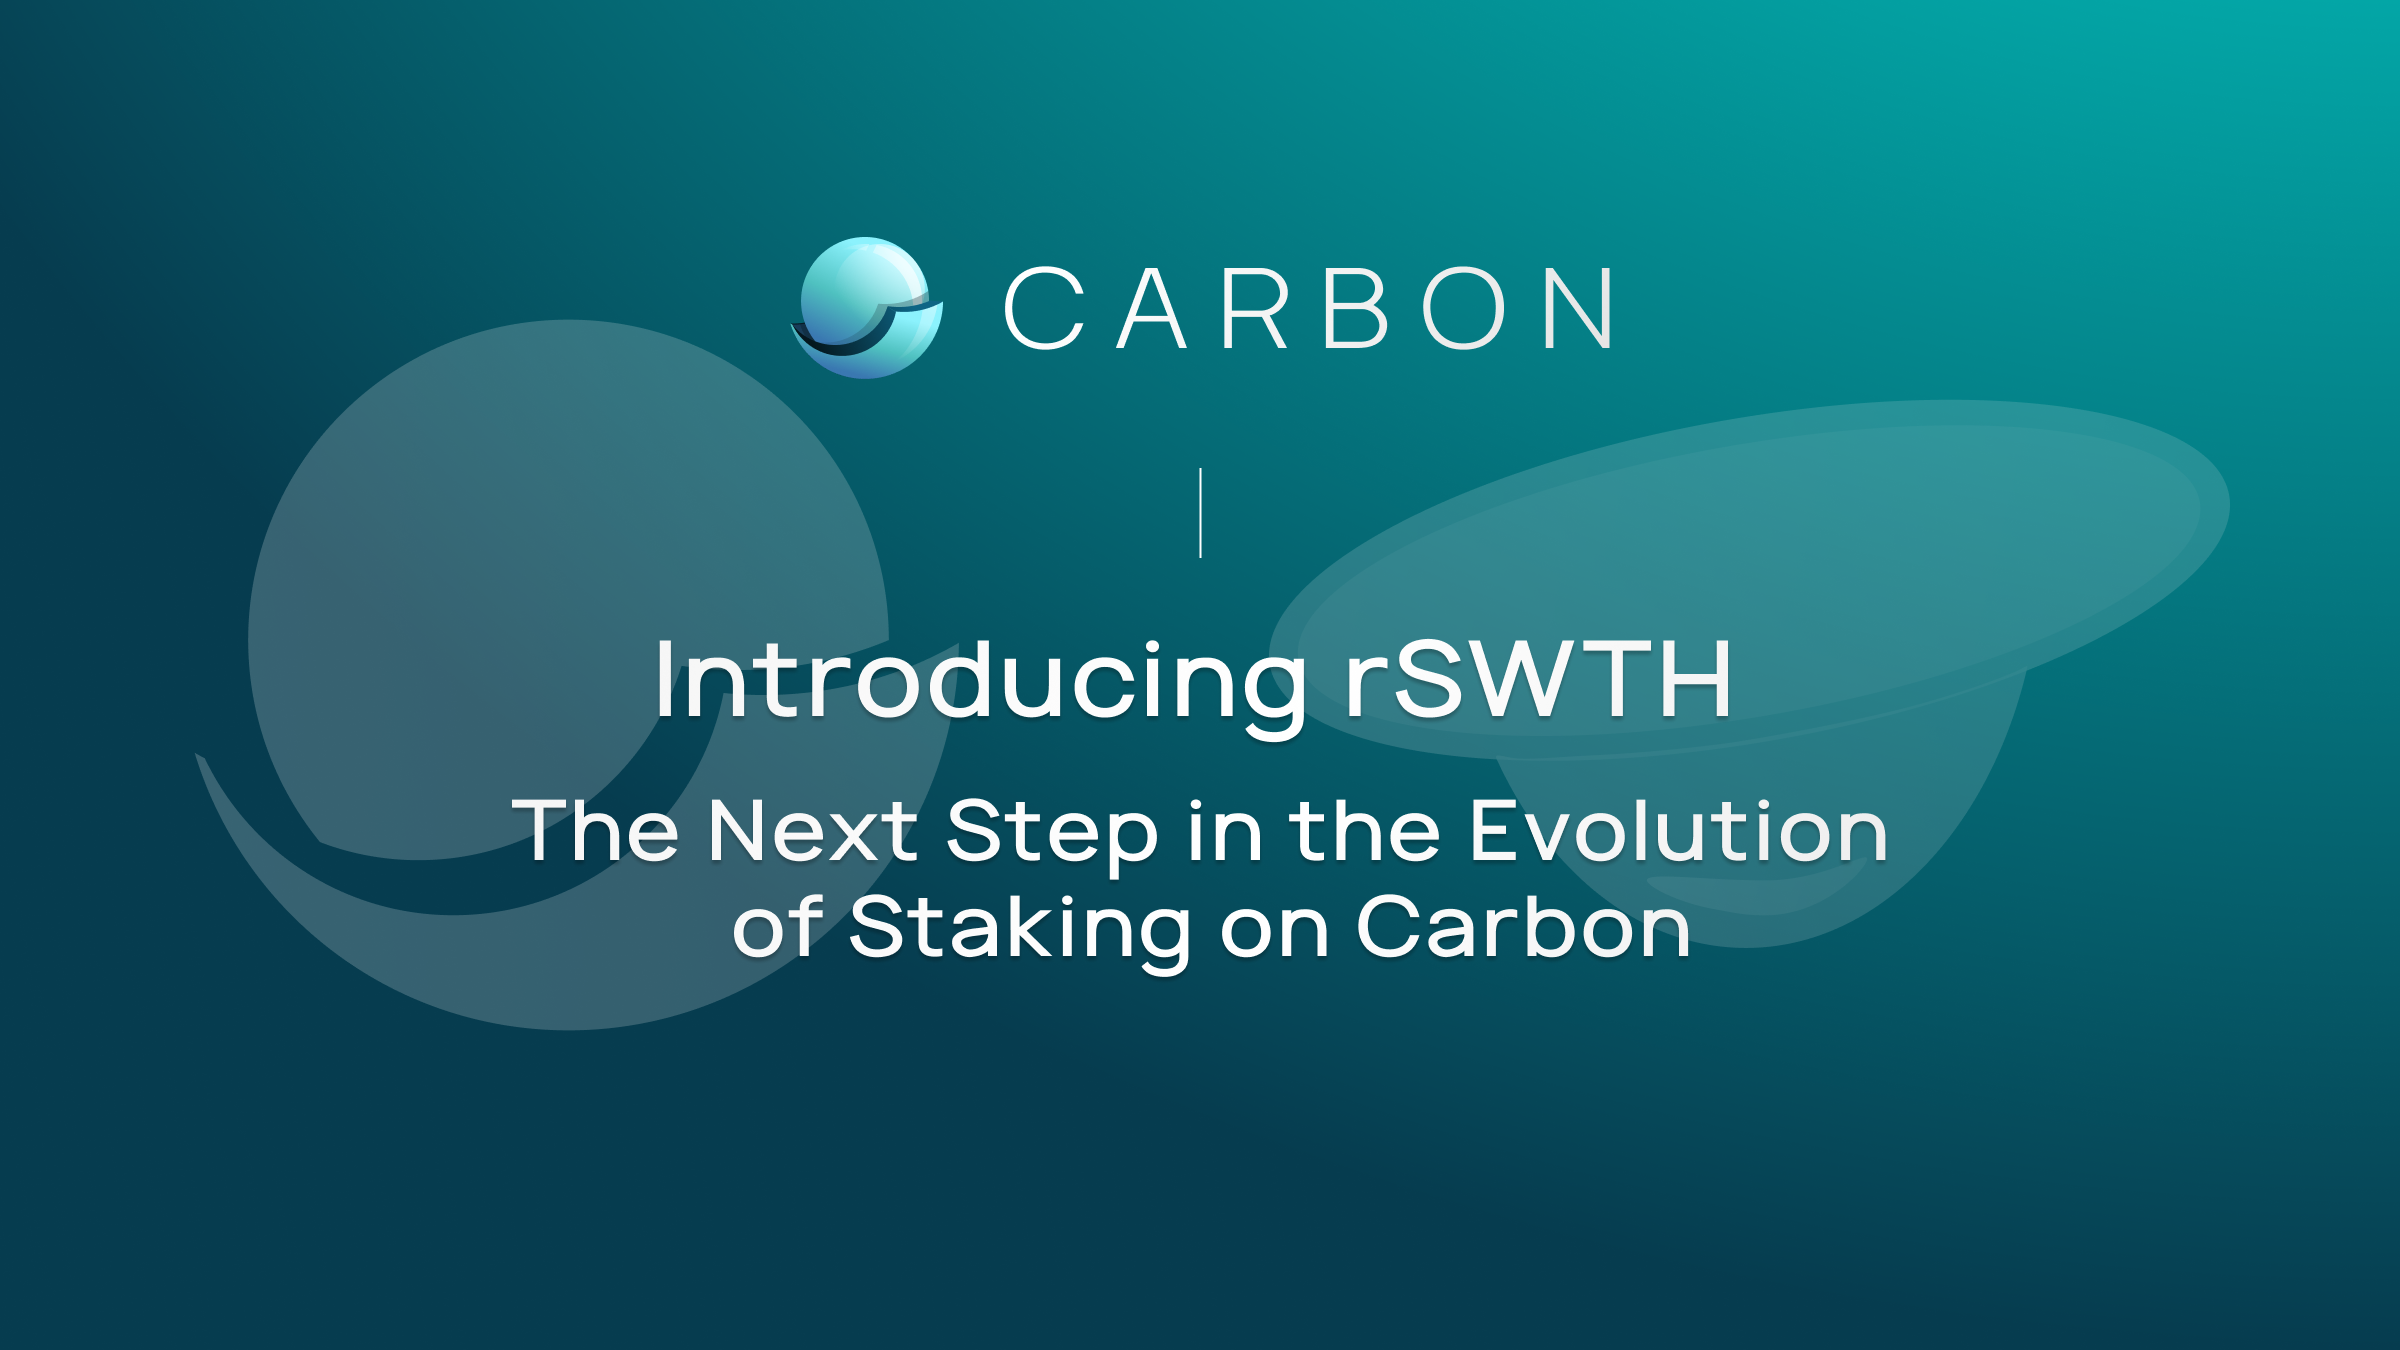 rSWTH: The Next Step in the Evolution of Staking on Carbon